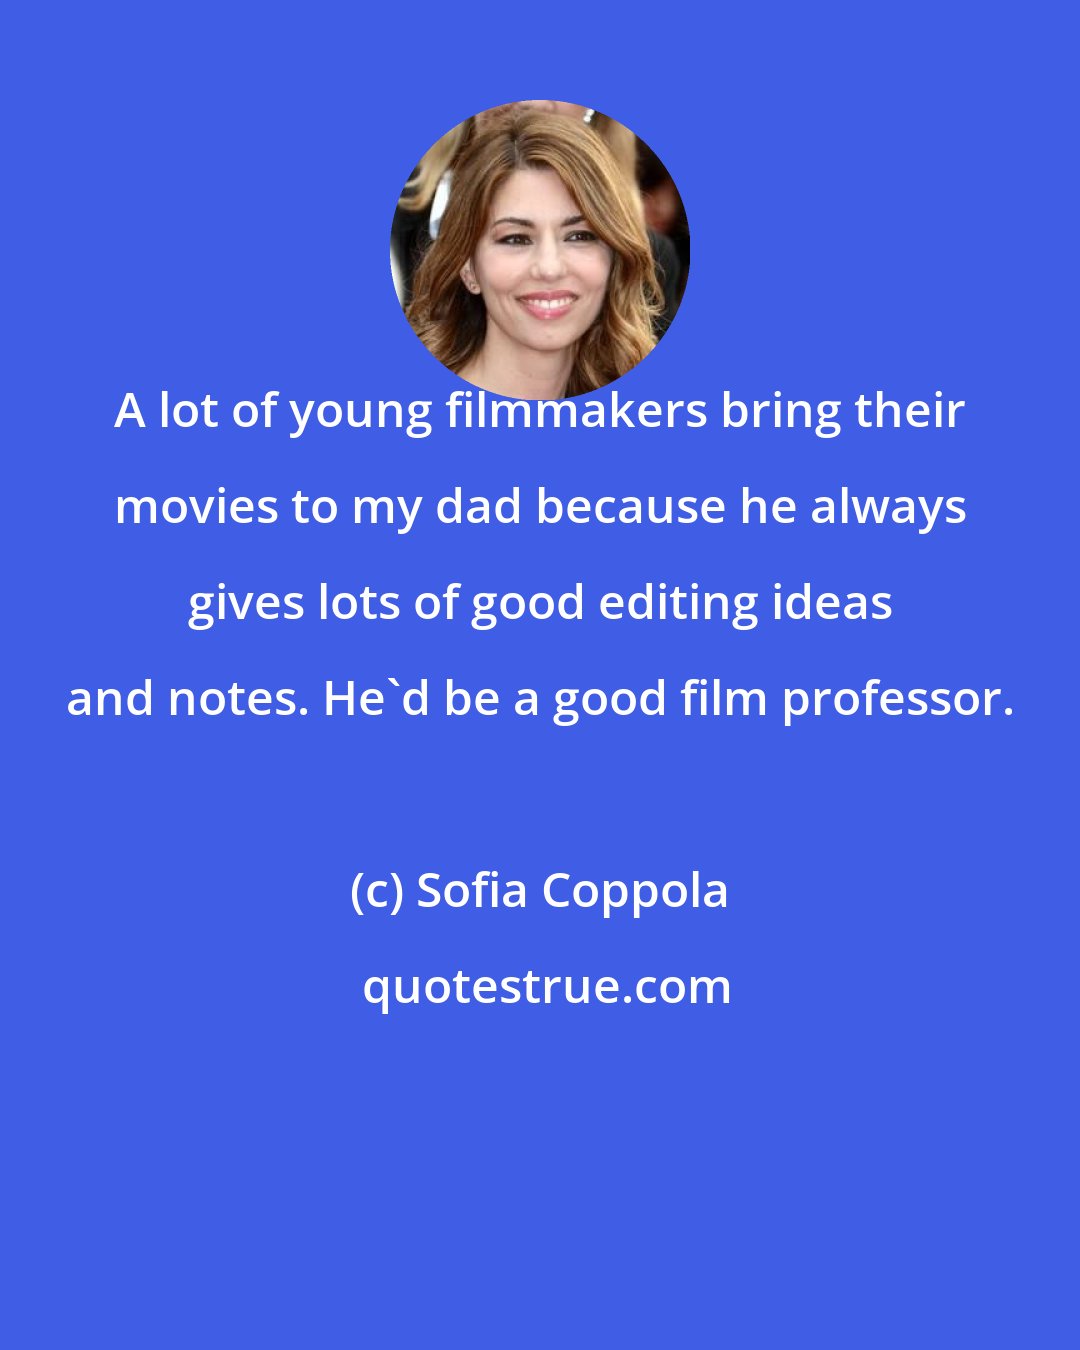 Sofia Coppola: A lot of young filmmakers bring their movies to my dad because he always gives lots of good editing ideas and notes. He'd be a good film professor.